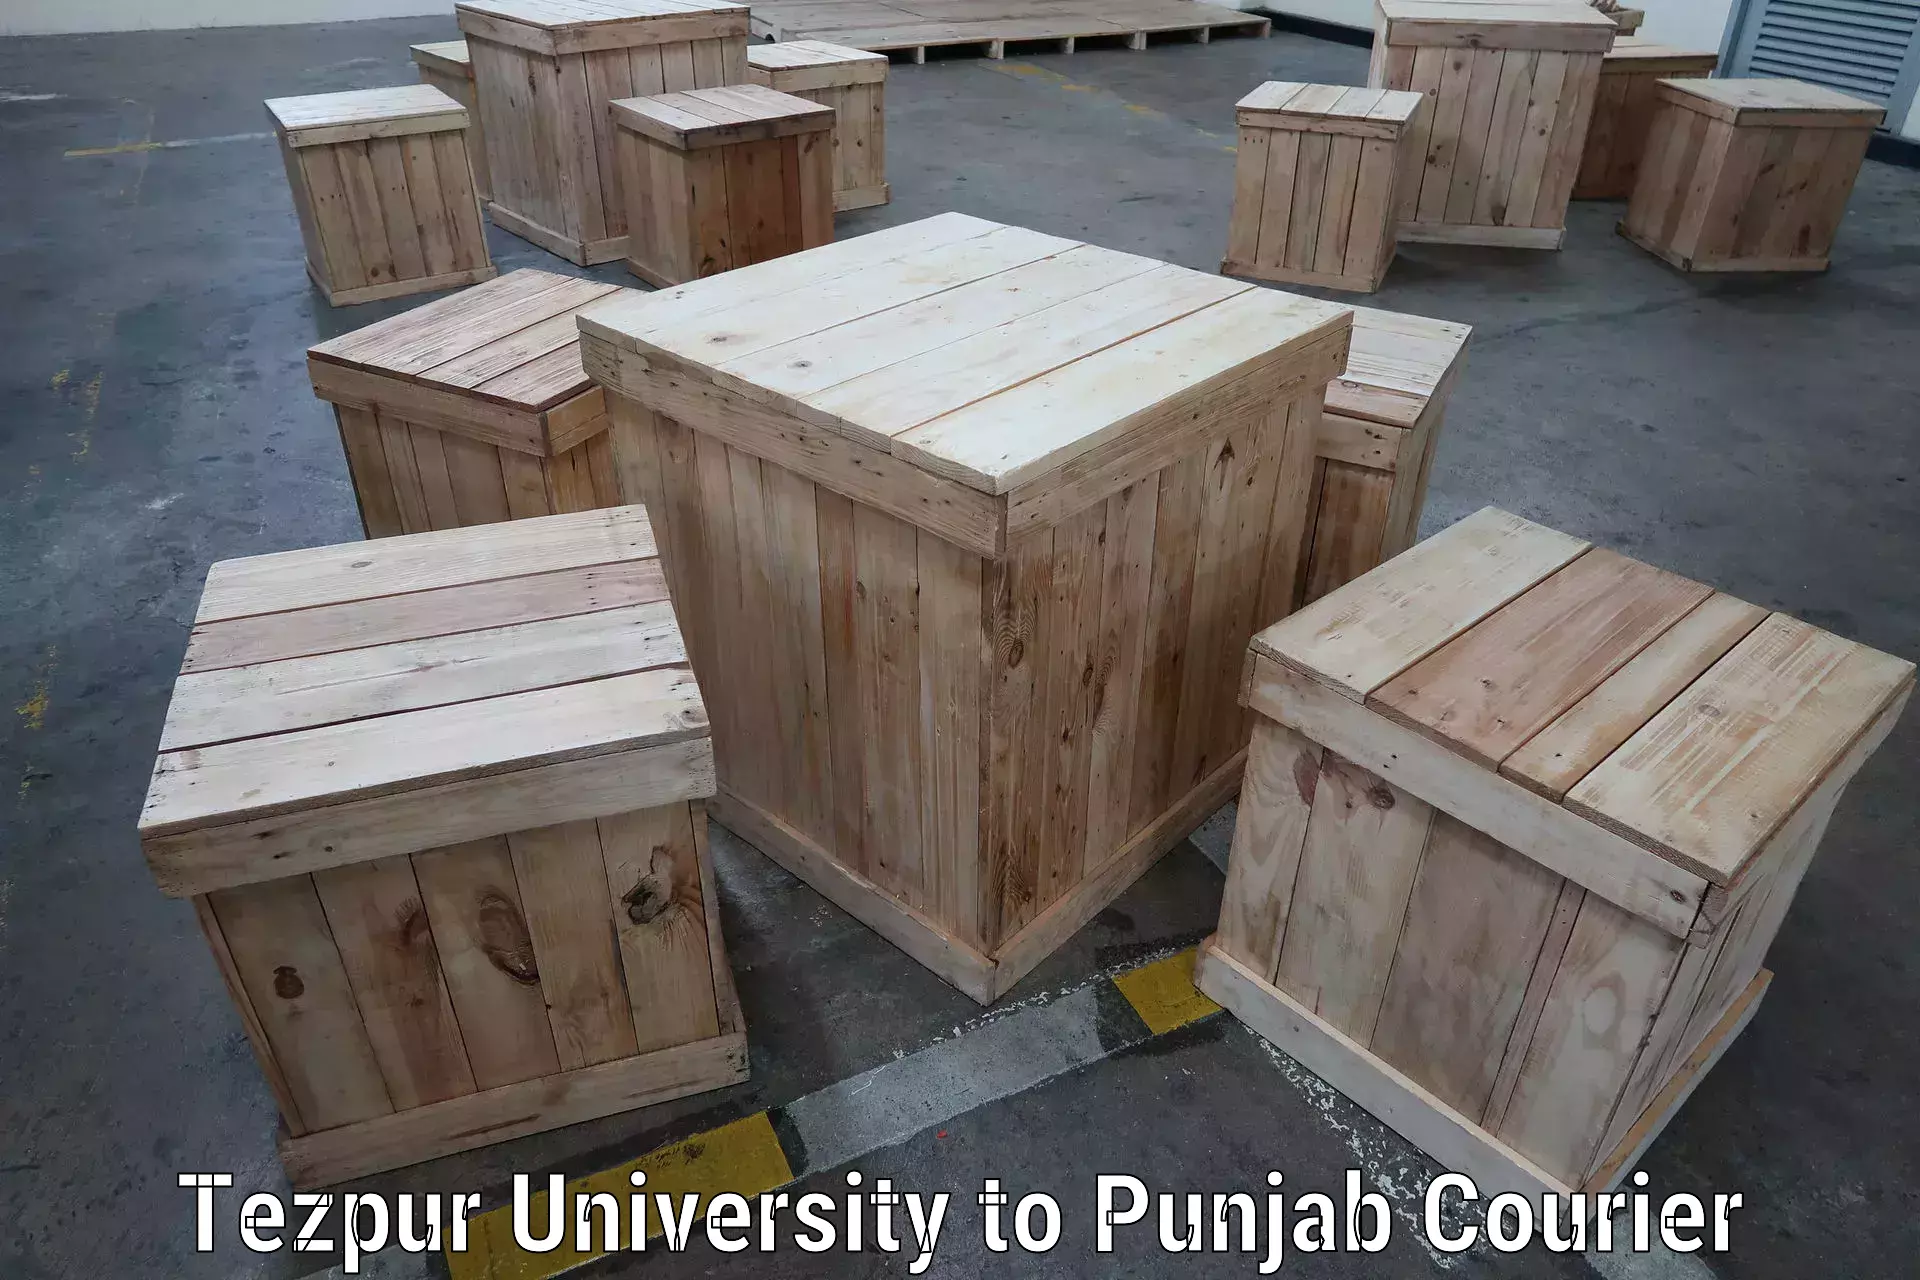 Efficient shipping operations in Tezpur University to Amritsar